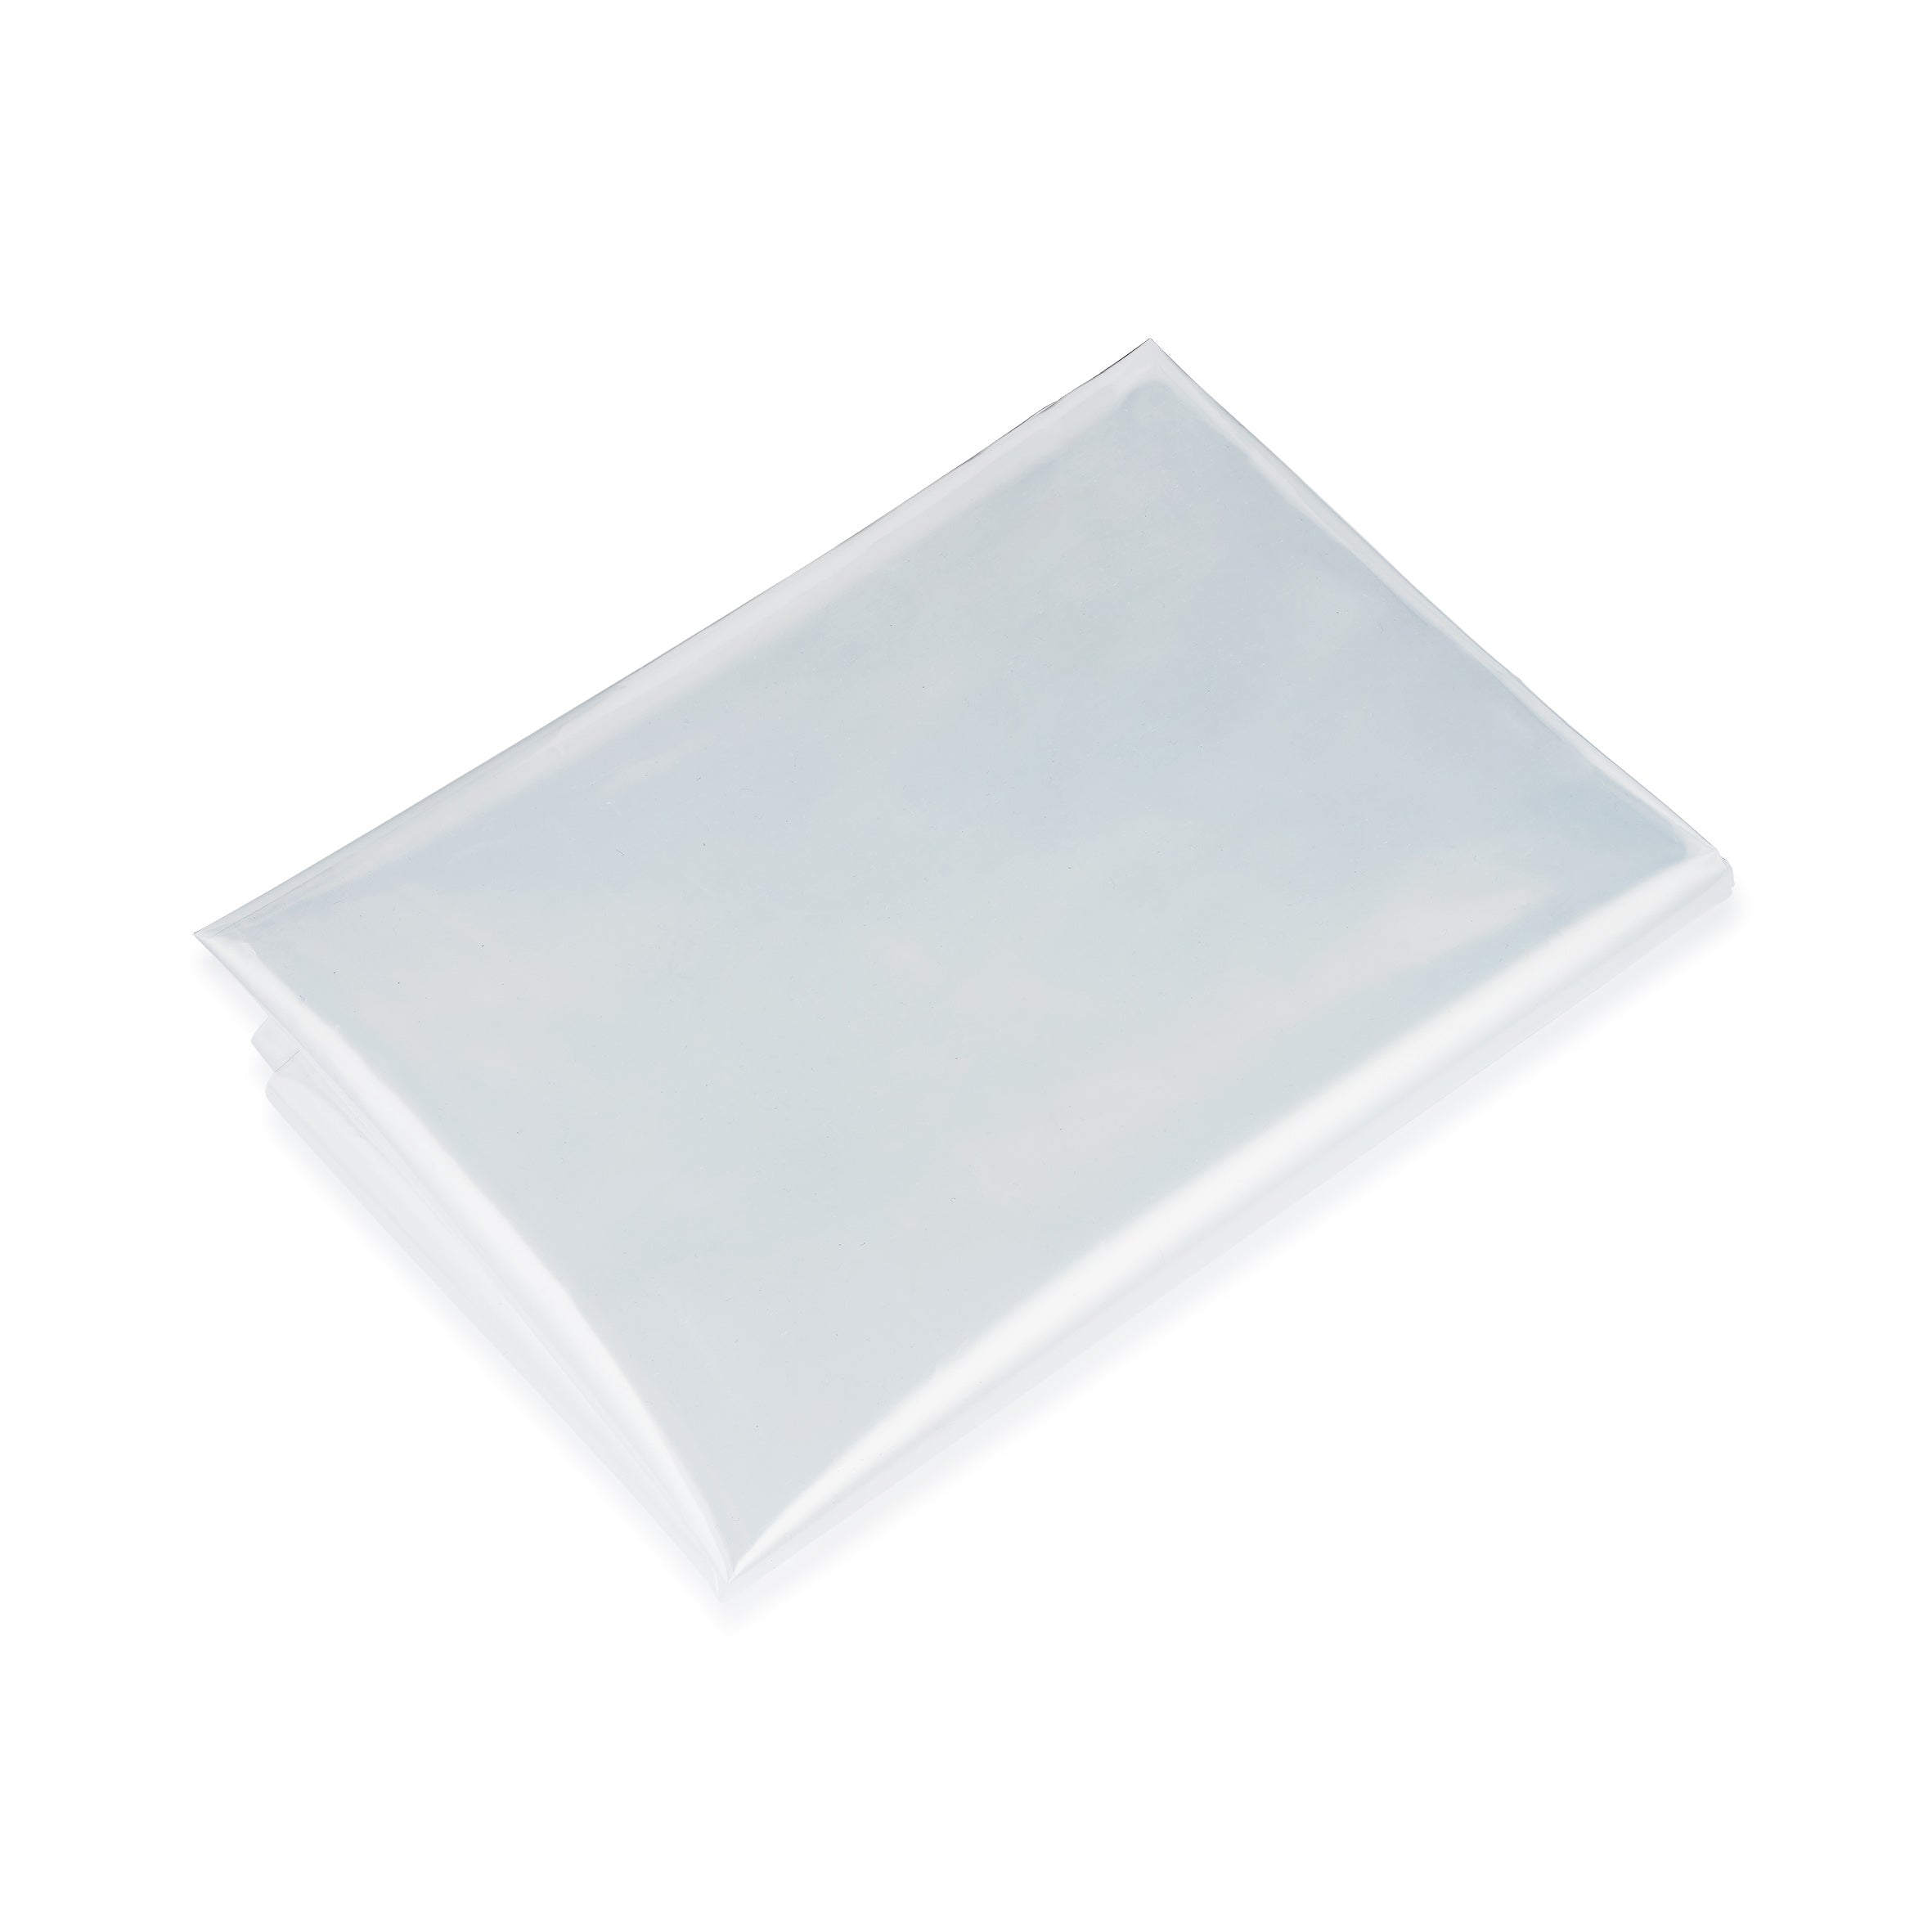 Dust Collector Bottom Plastic Bag 100 Pack - Suits UFO-101B, 102B